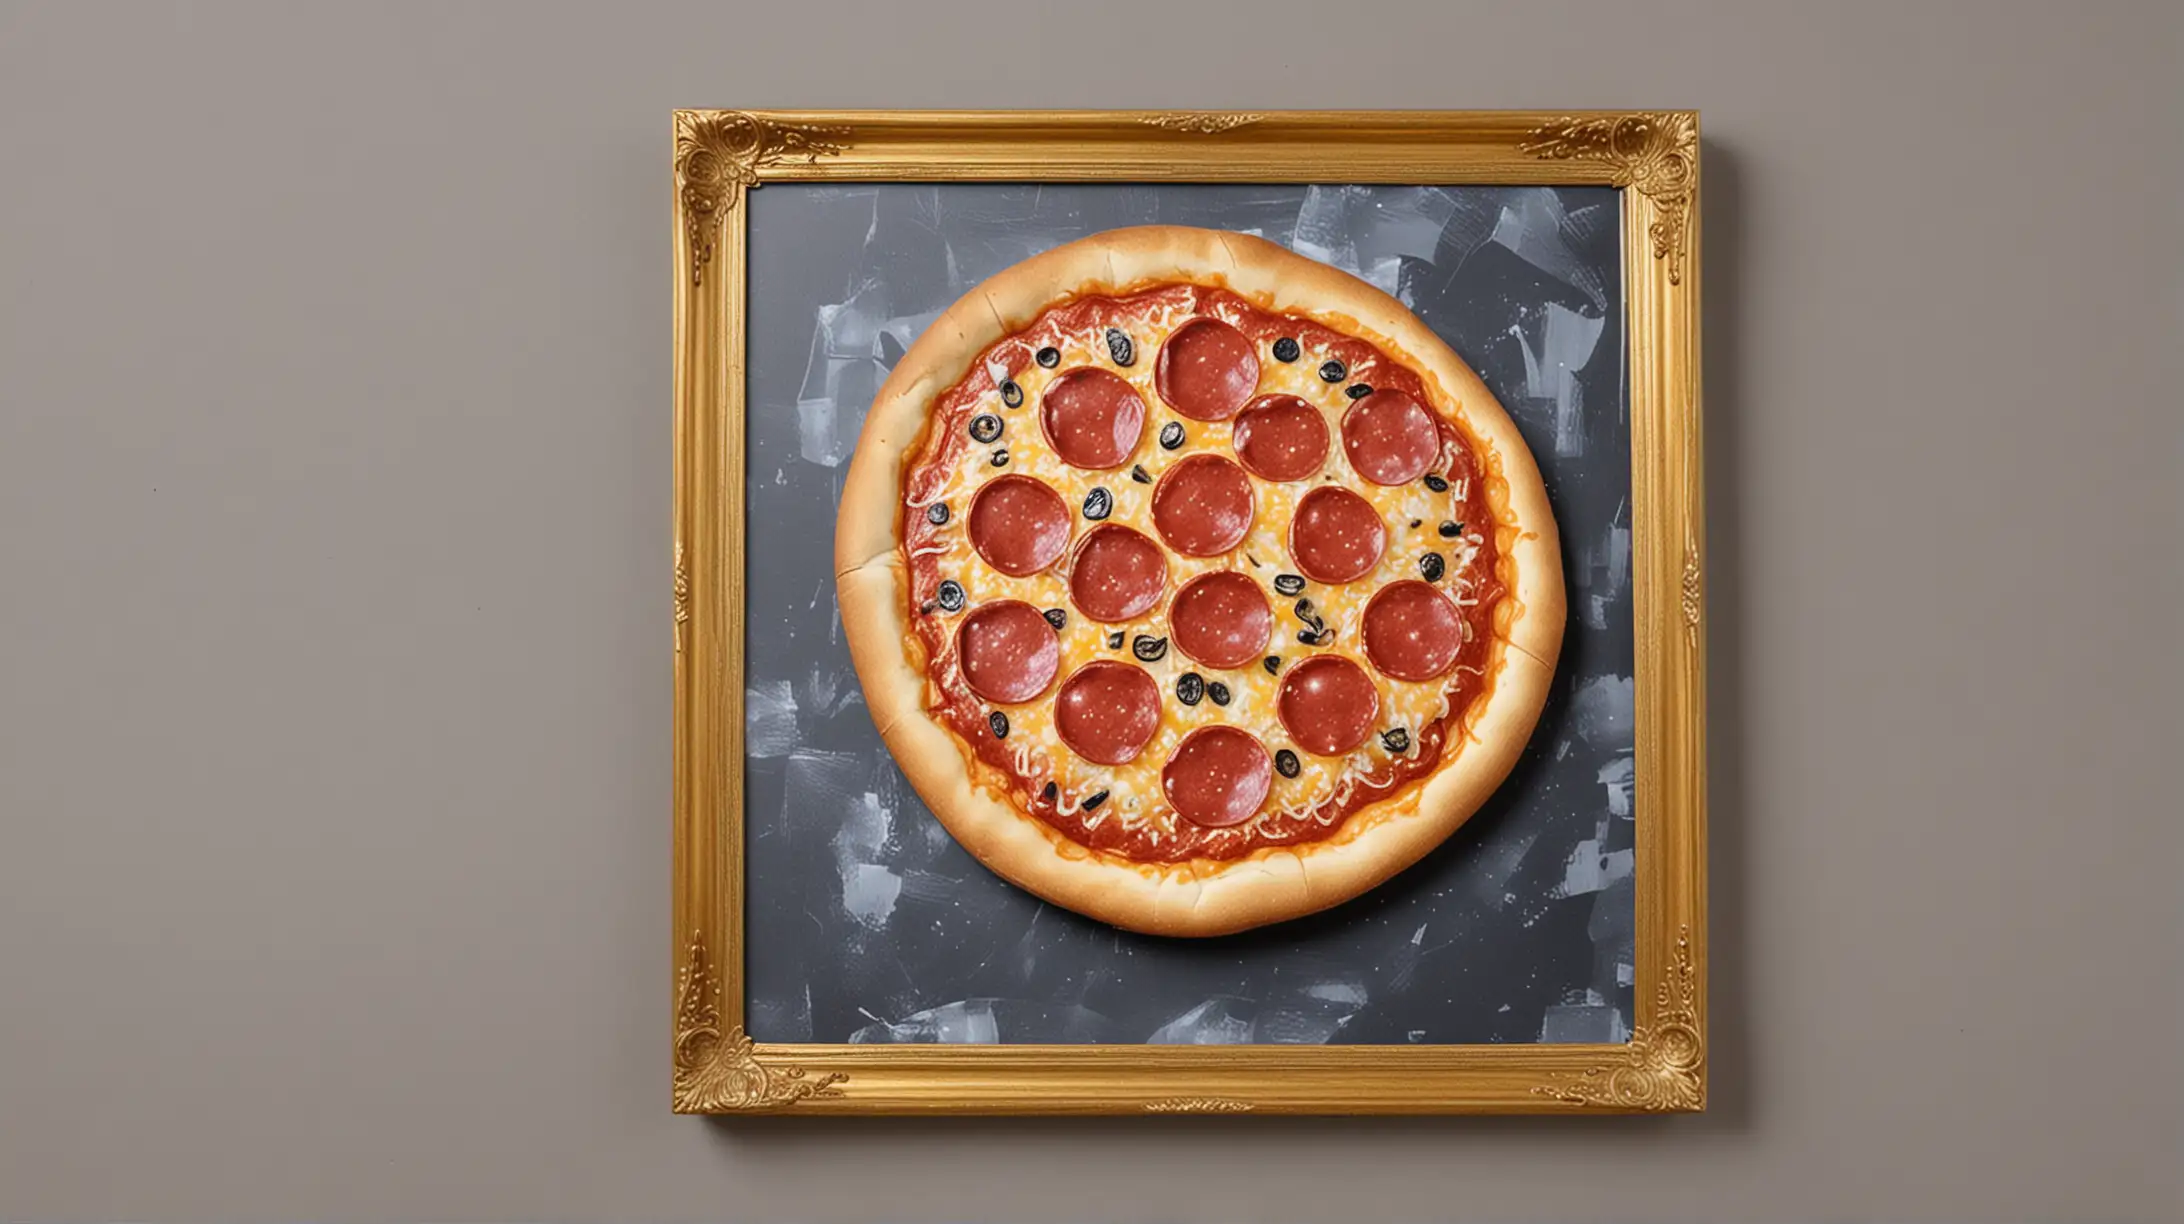 Delicious Small Pepperoni Pizza on Canvas in Gold Frame